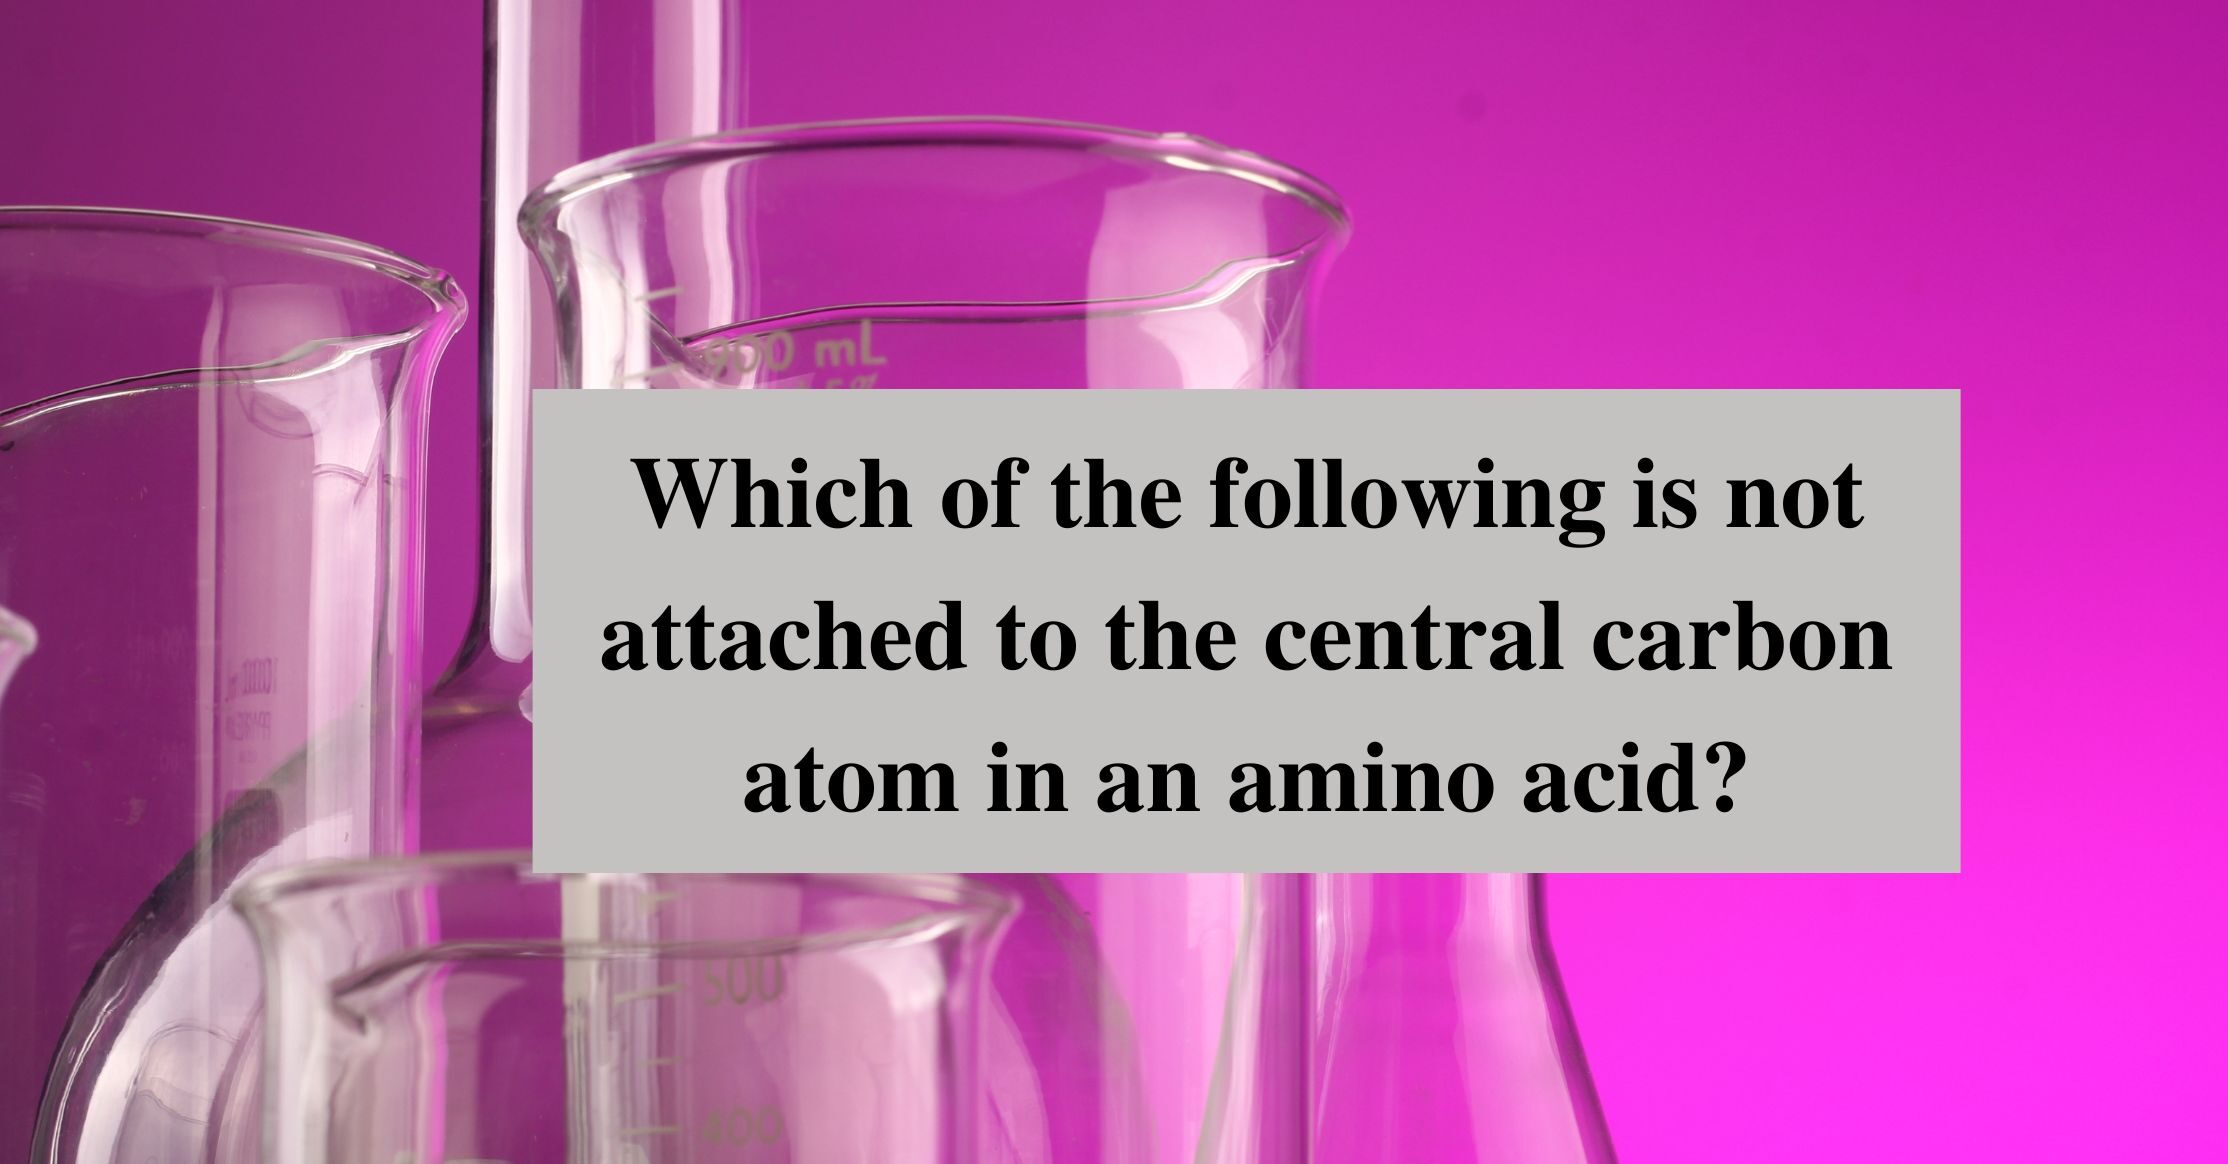 Which of the following is not attached to the central carbon atom in an amino acid?